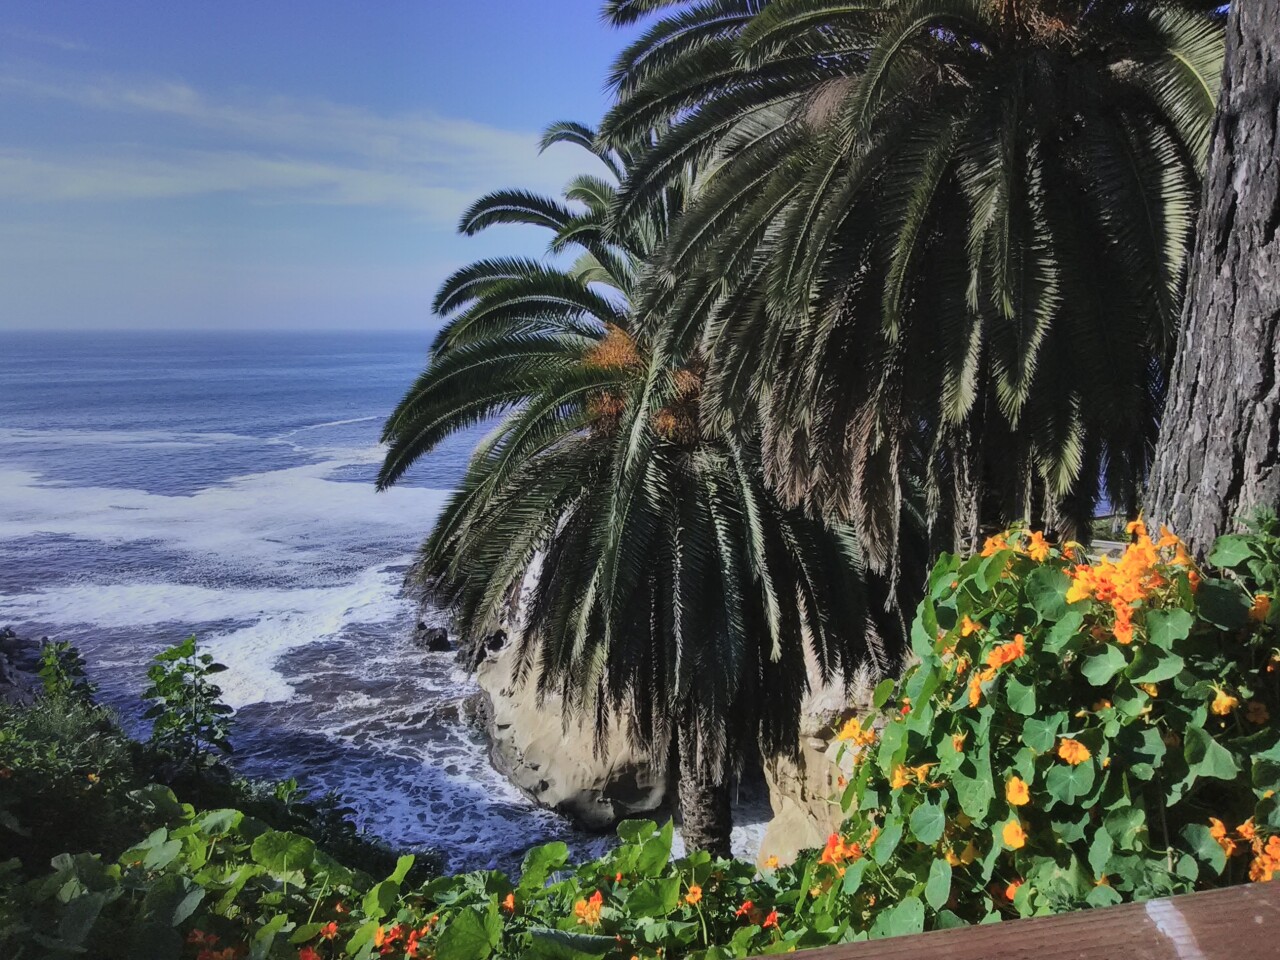 Vincent and Maria Suzara captured this view of La Jolla Cove from the start of the Coast Walk.